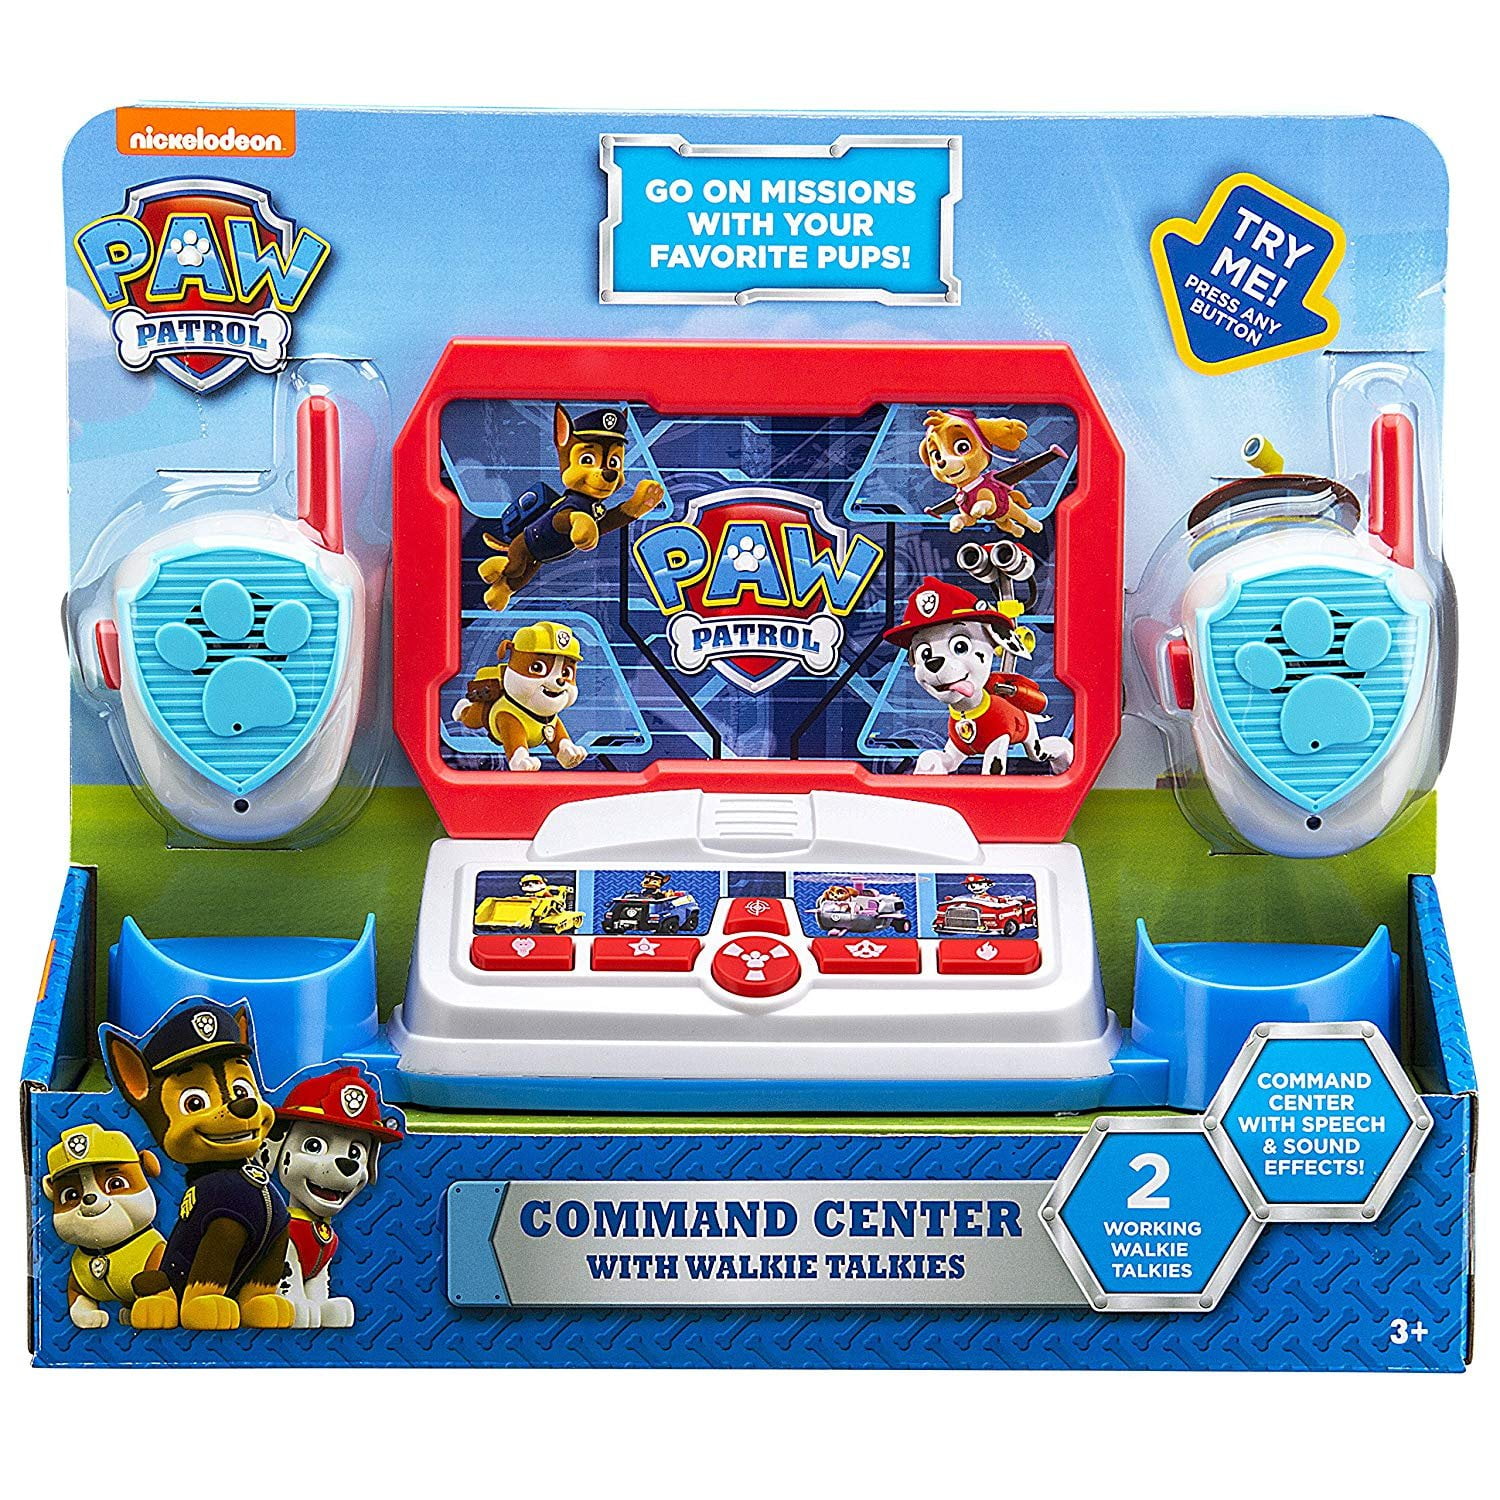 Paw Center with Friendly Walkie Talkies and Speech & Sound Effects - Walmart.com